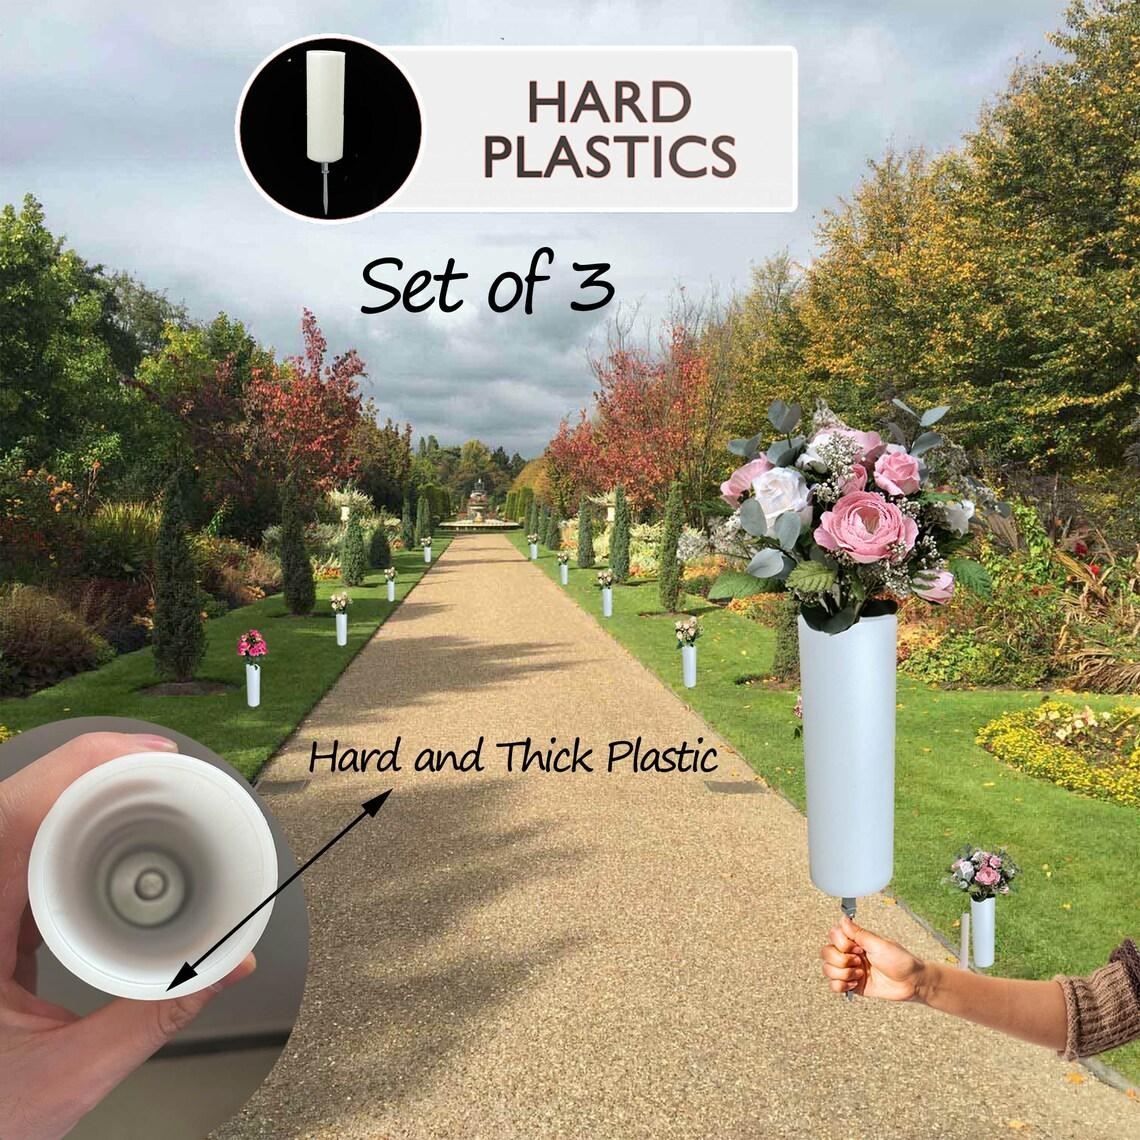 3 PCS Cone Vase Fresh and Artificial Flowers Sturdy Stake Monument Memorial Grave Decorations Cemetery Grave Vase